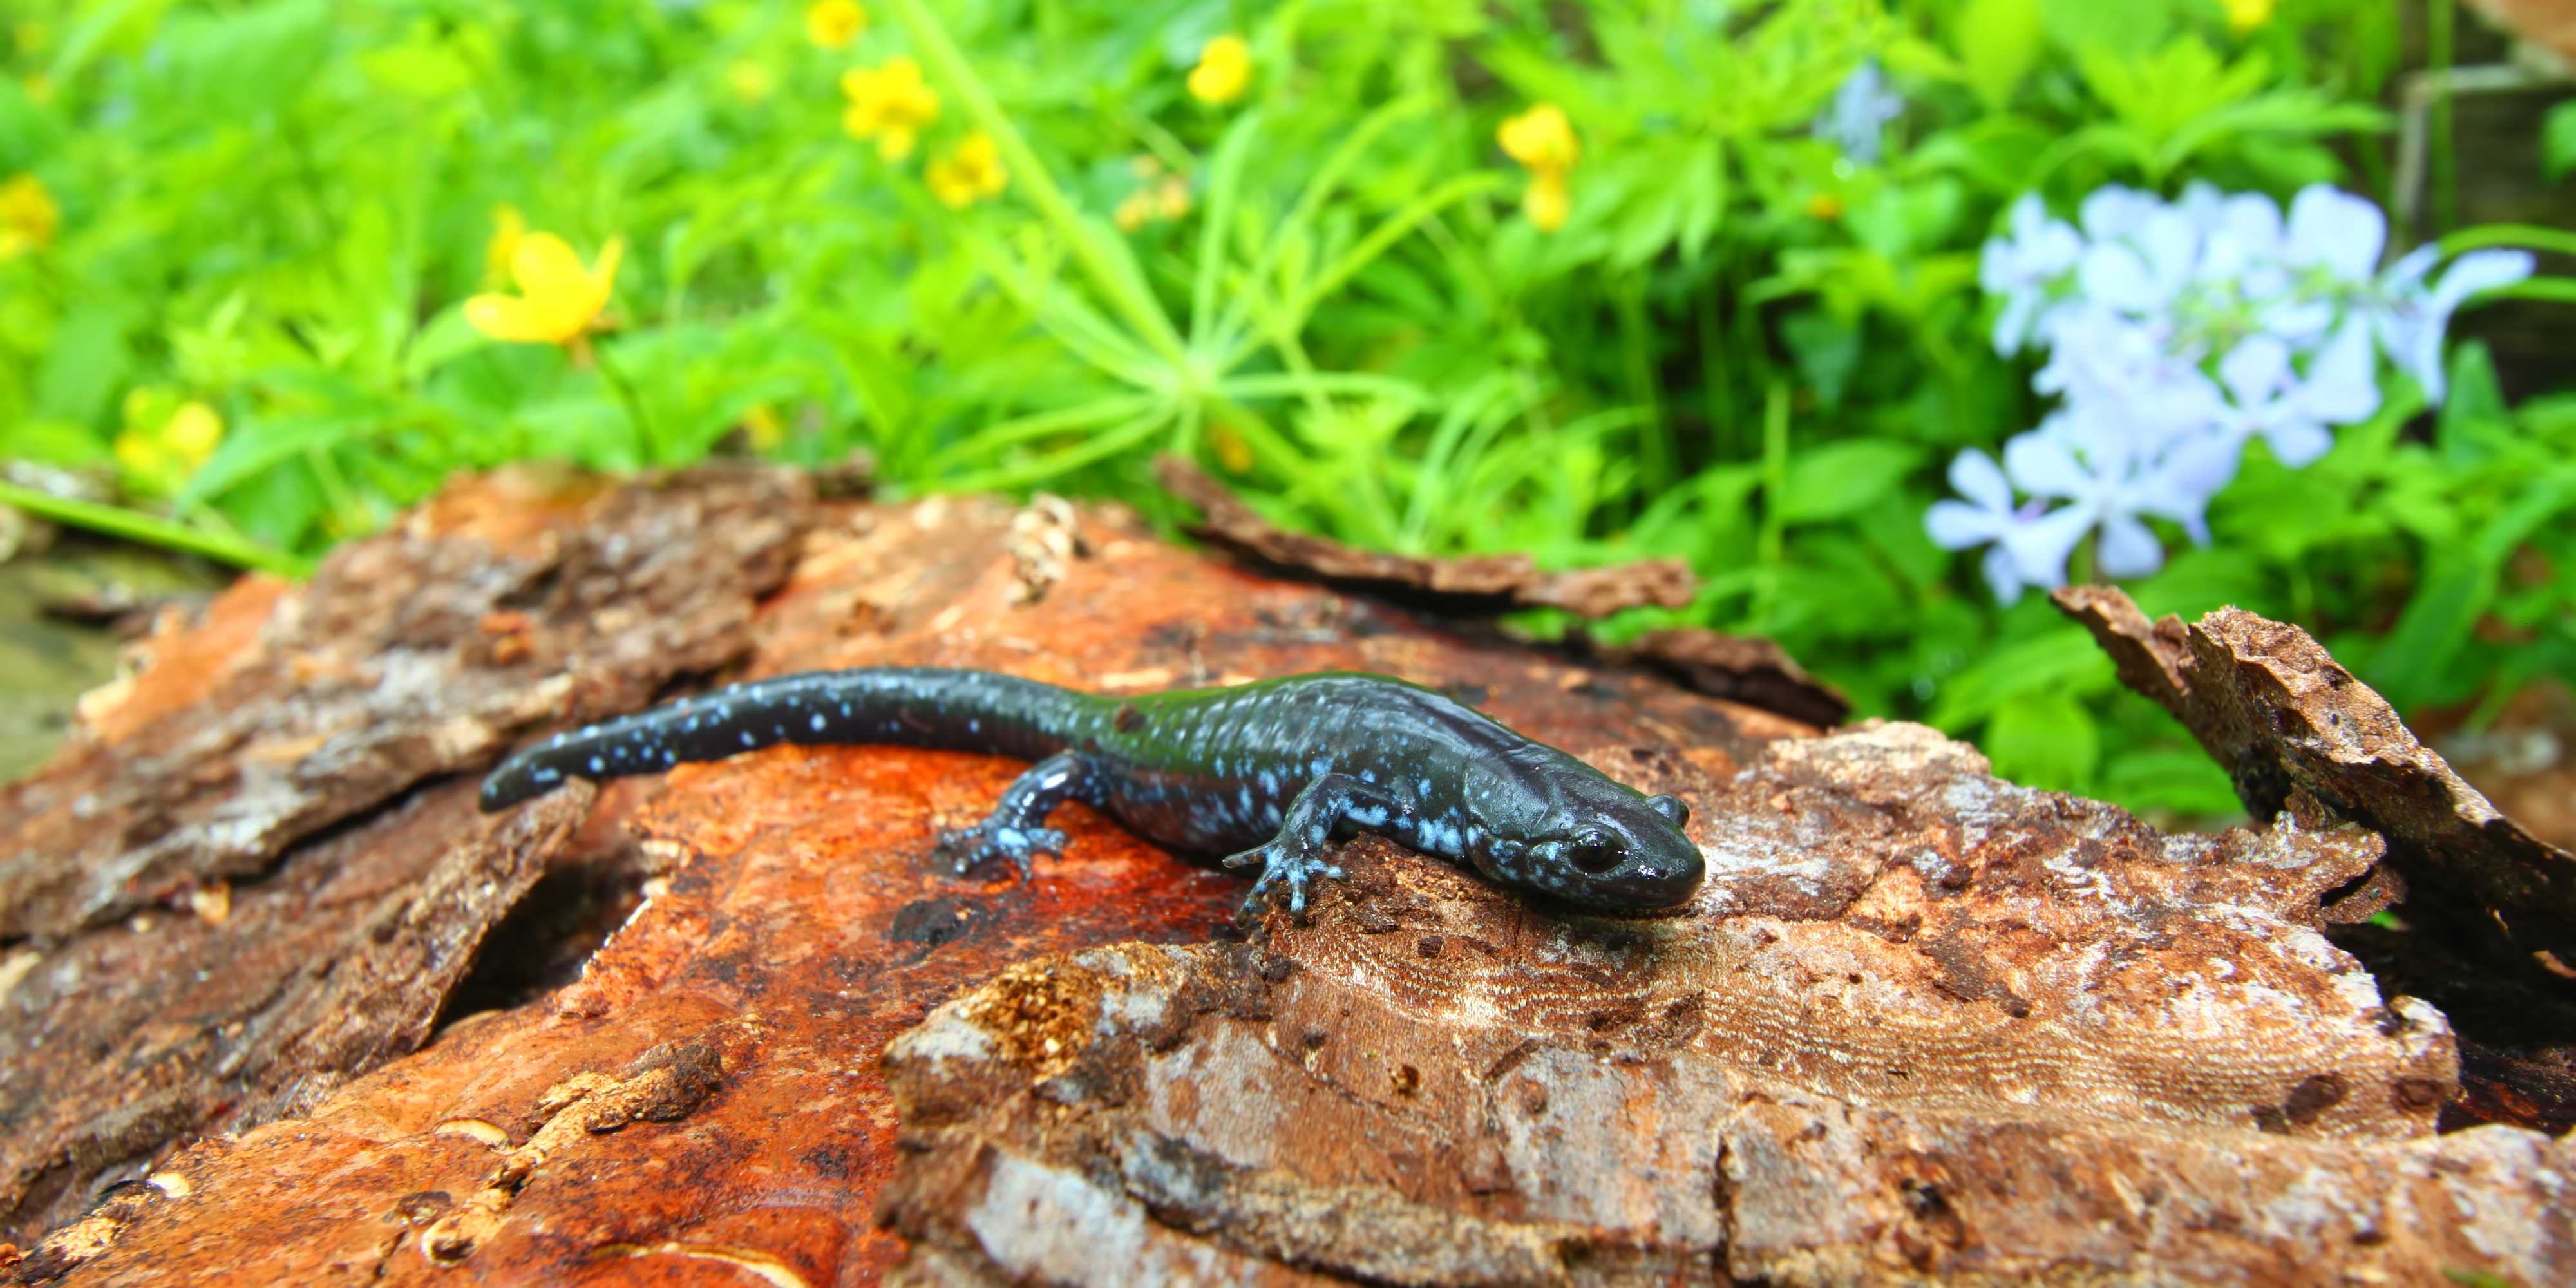 A blue-spotted salamander draped on top of a down log